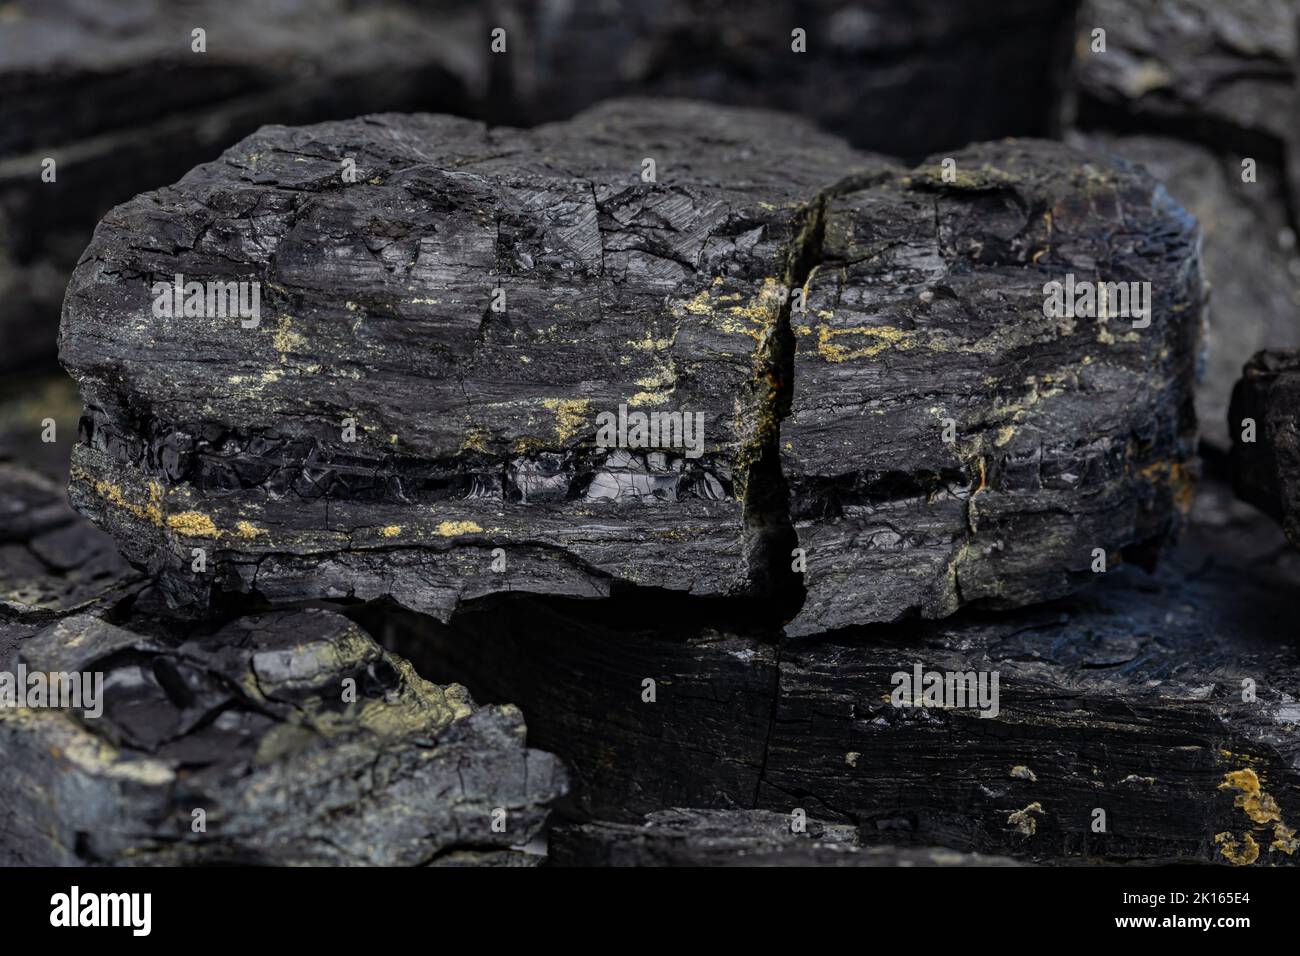 Closeup of black coal lumps. Fossil fuel, air pollution and coal mining industry concept. Stock Photo